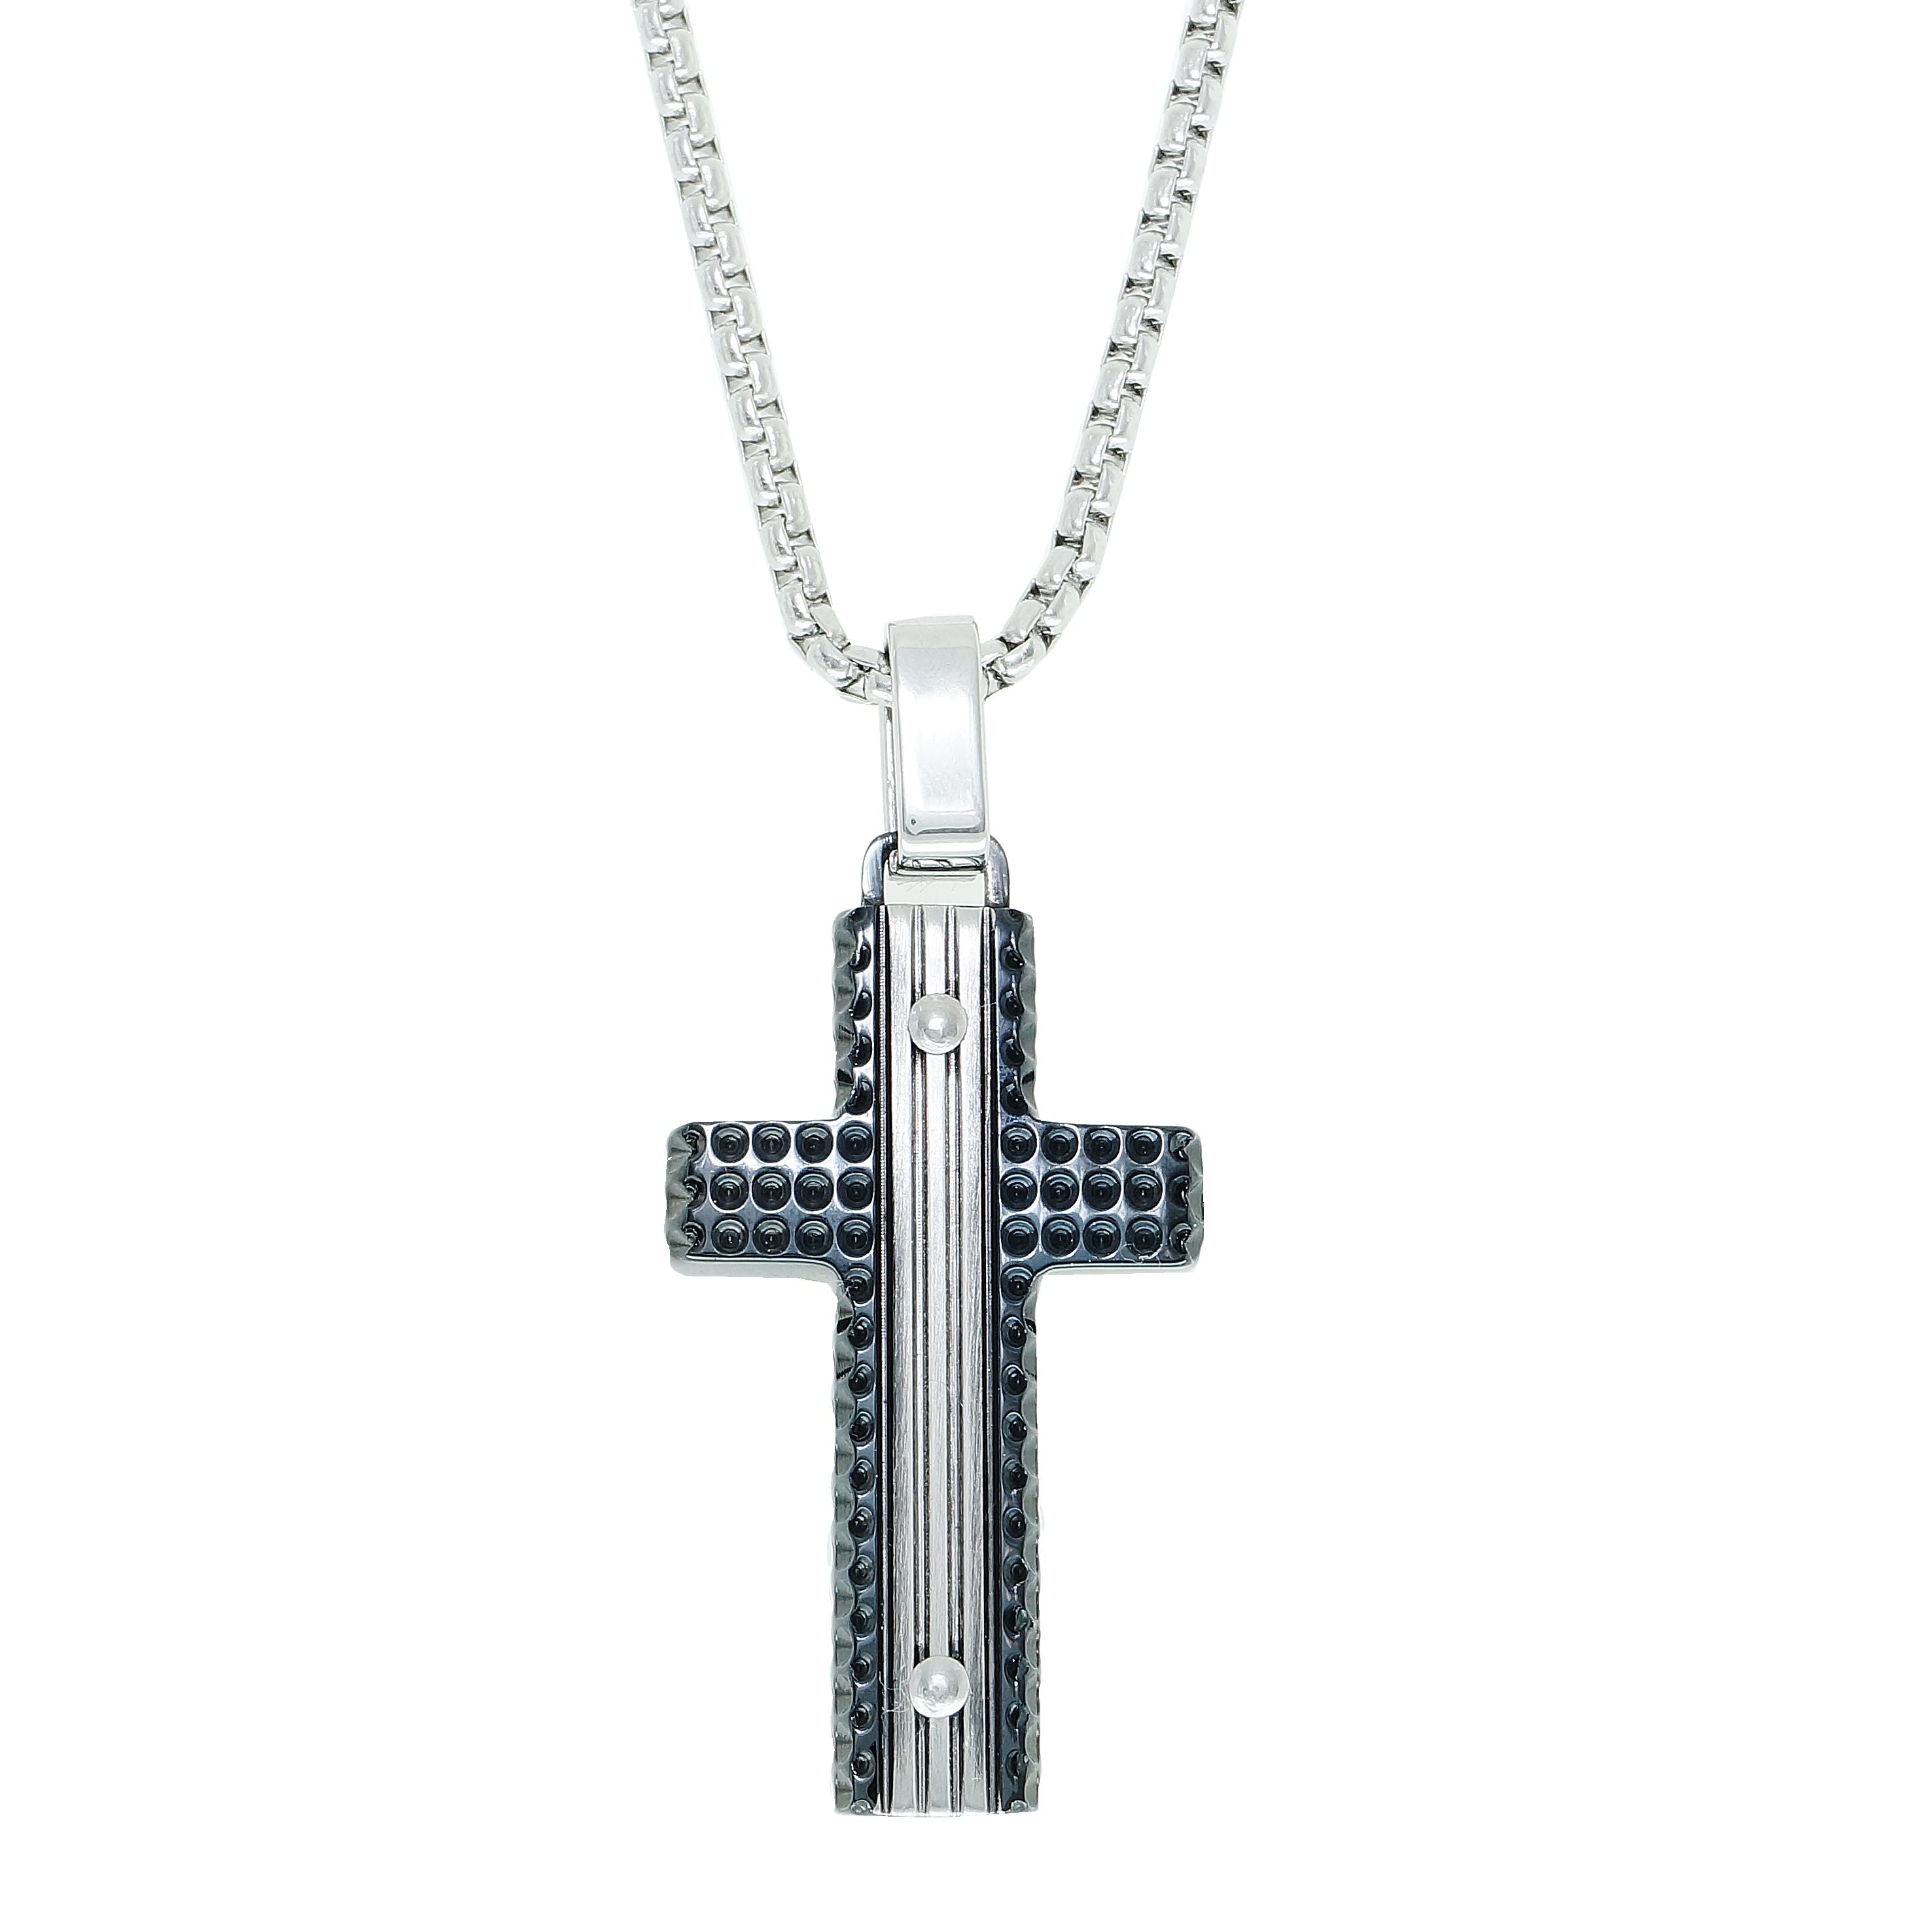 Men's Stainless Steel Cross and Chain